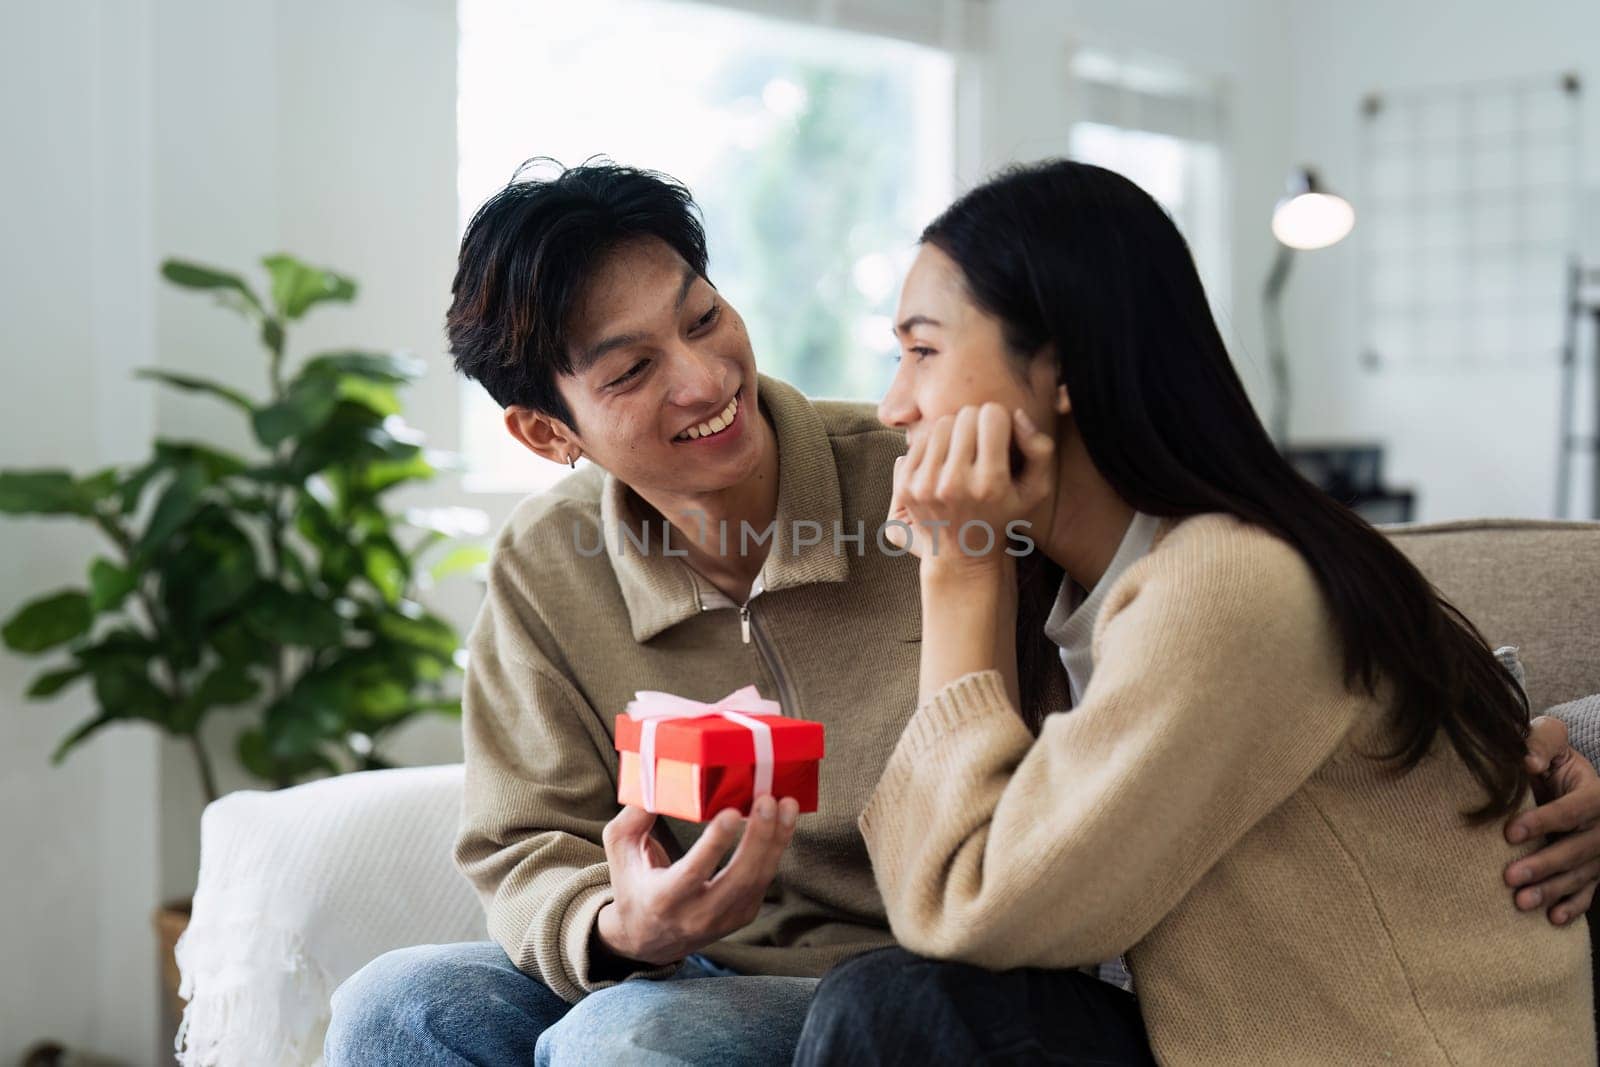 Young couple Hug and giving present on Valentine's Day. Romantic day together. Valentine's Day concept.